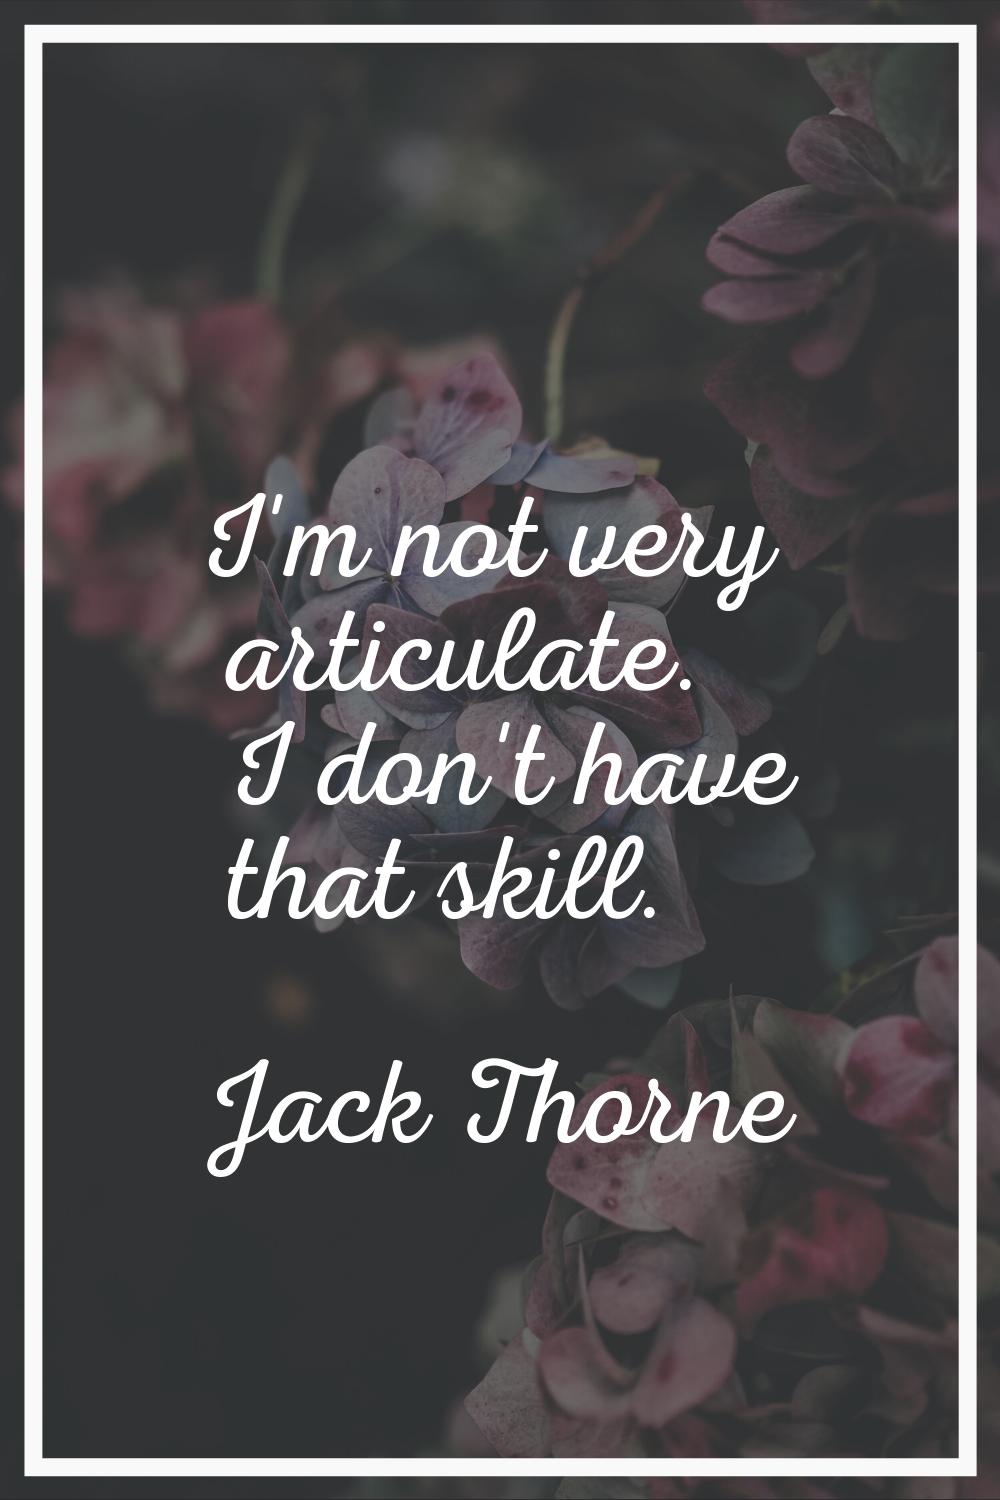 I'm not very articulate. I don't have that skill.